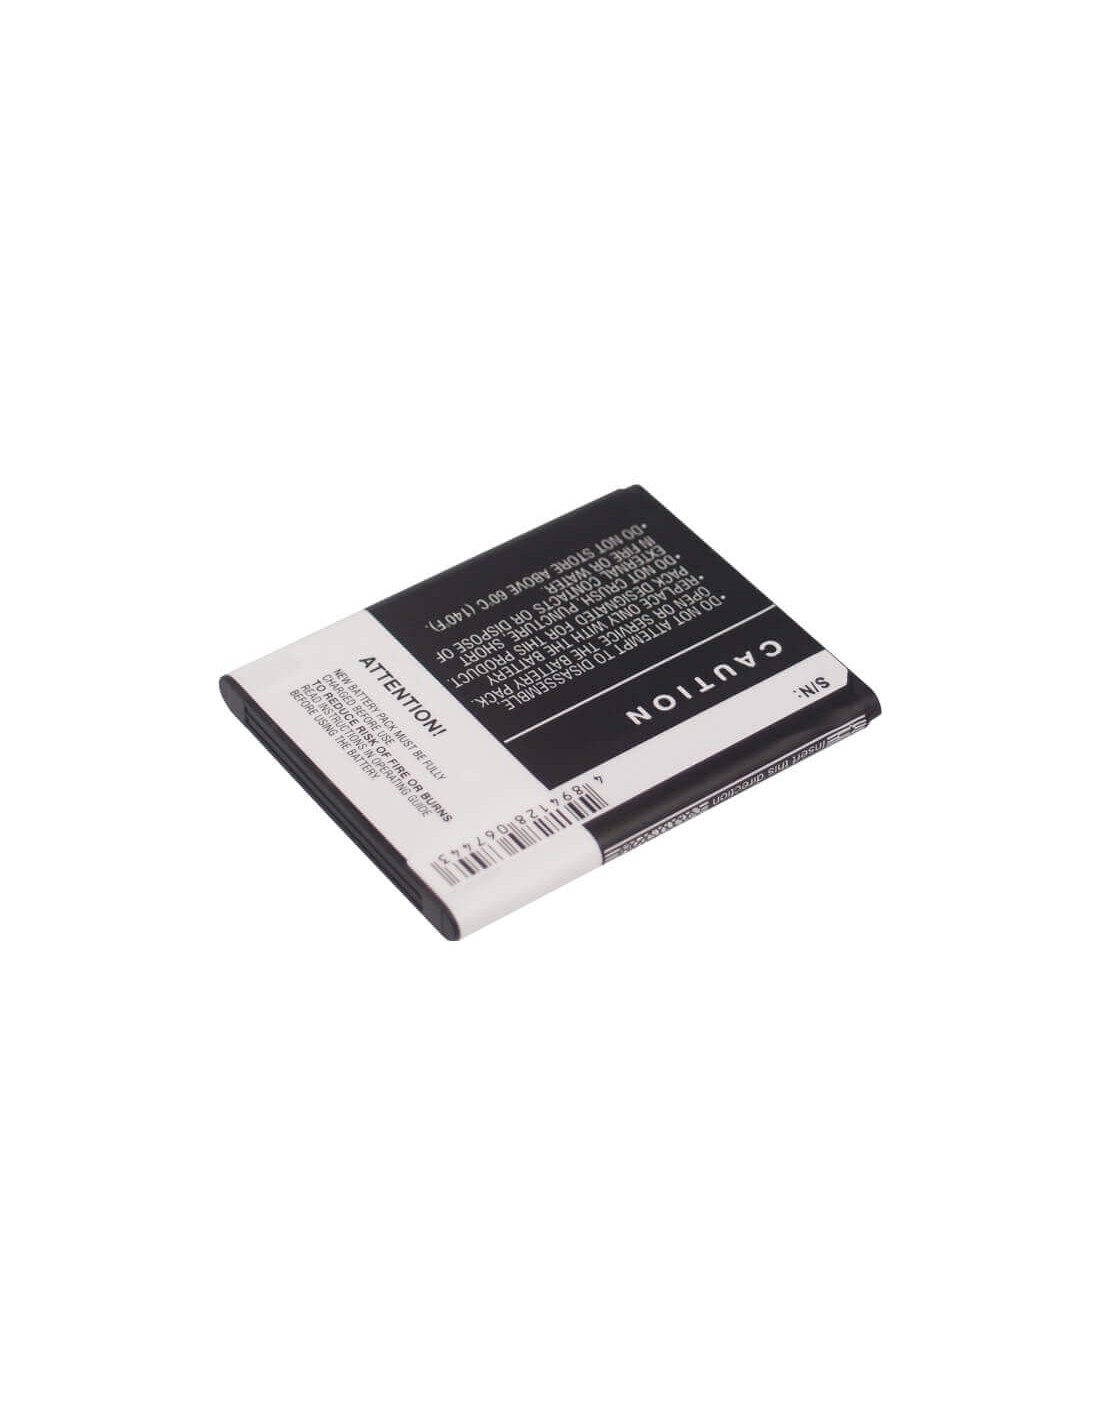 Battery for Huawei U8150, IDEOS, C8500 3.7V, 1300mAh - 4.81Wh